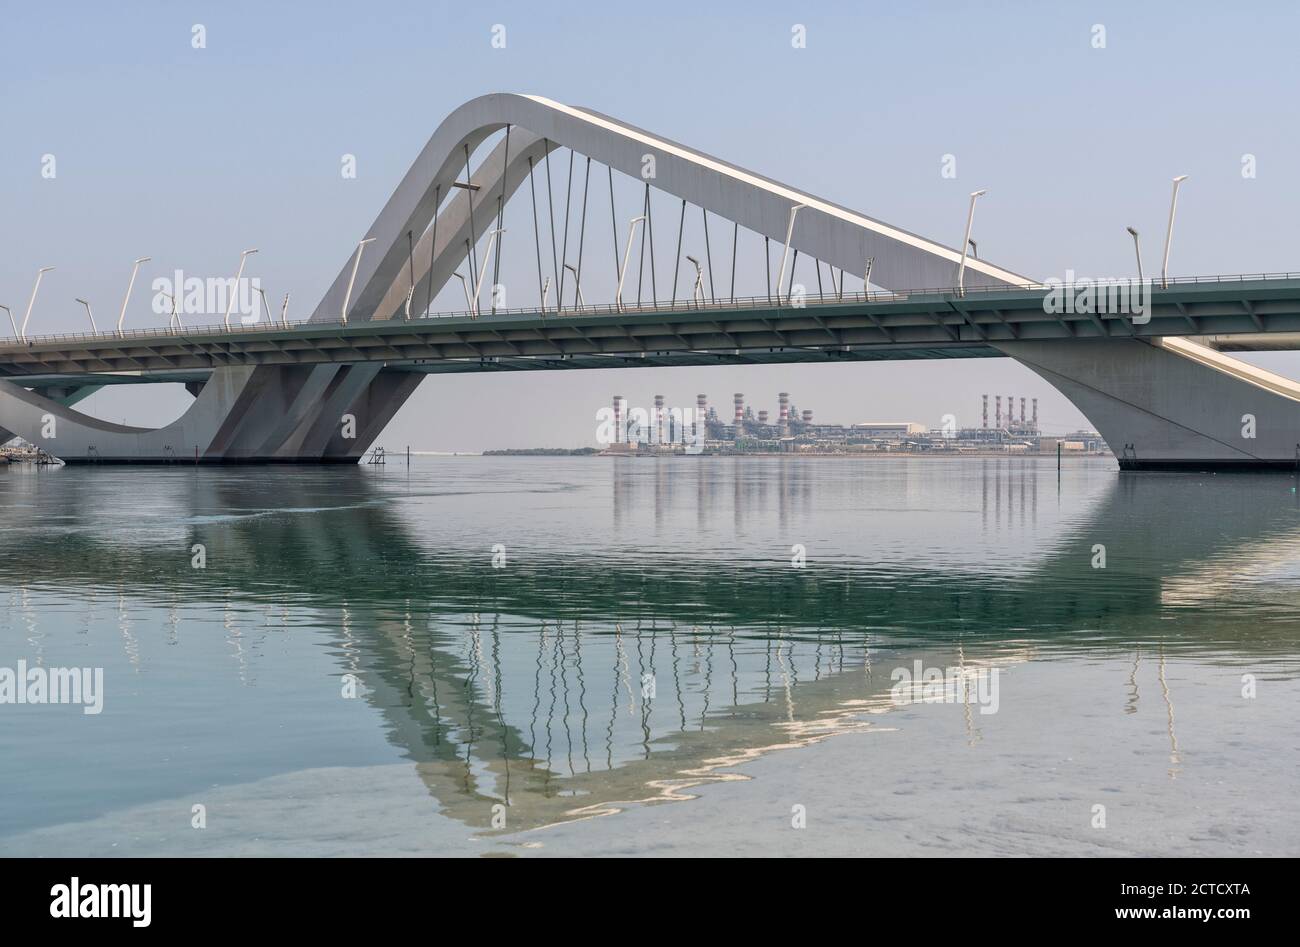 A day shot of the Sheikh Zayed Bridge, Abu Dhabi completed in 2010. Stock Photo